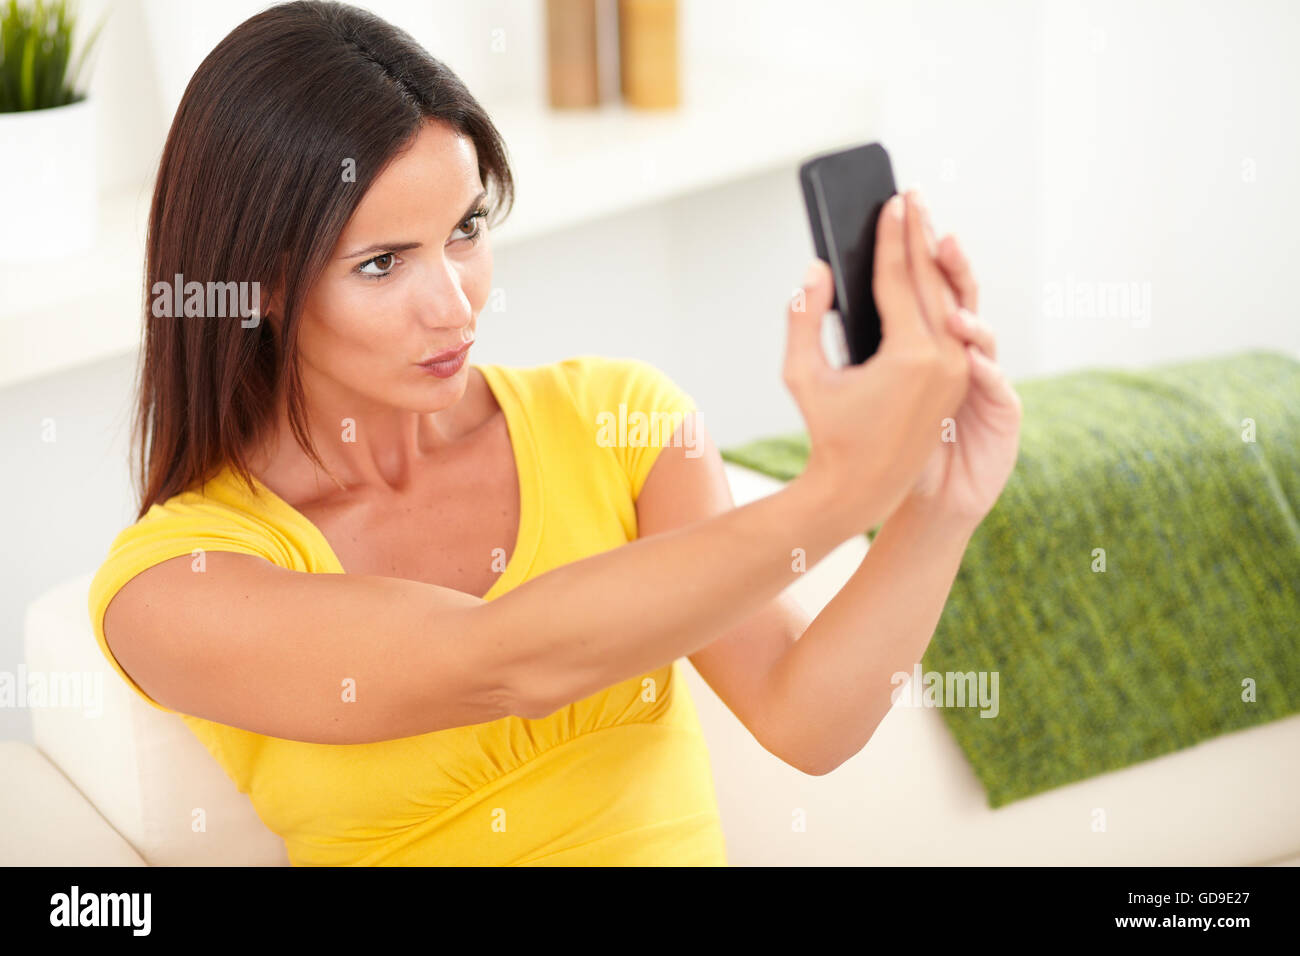 Attractive young woman in yellow shirt taking a selfie while sitting indoors Stock Photo